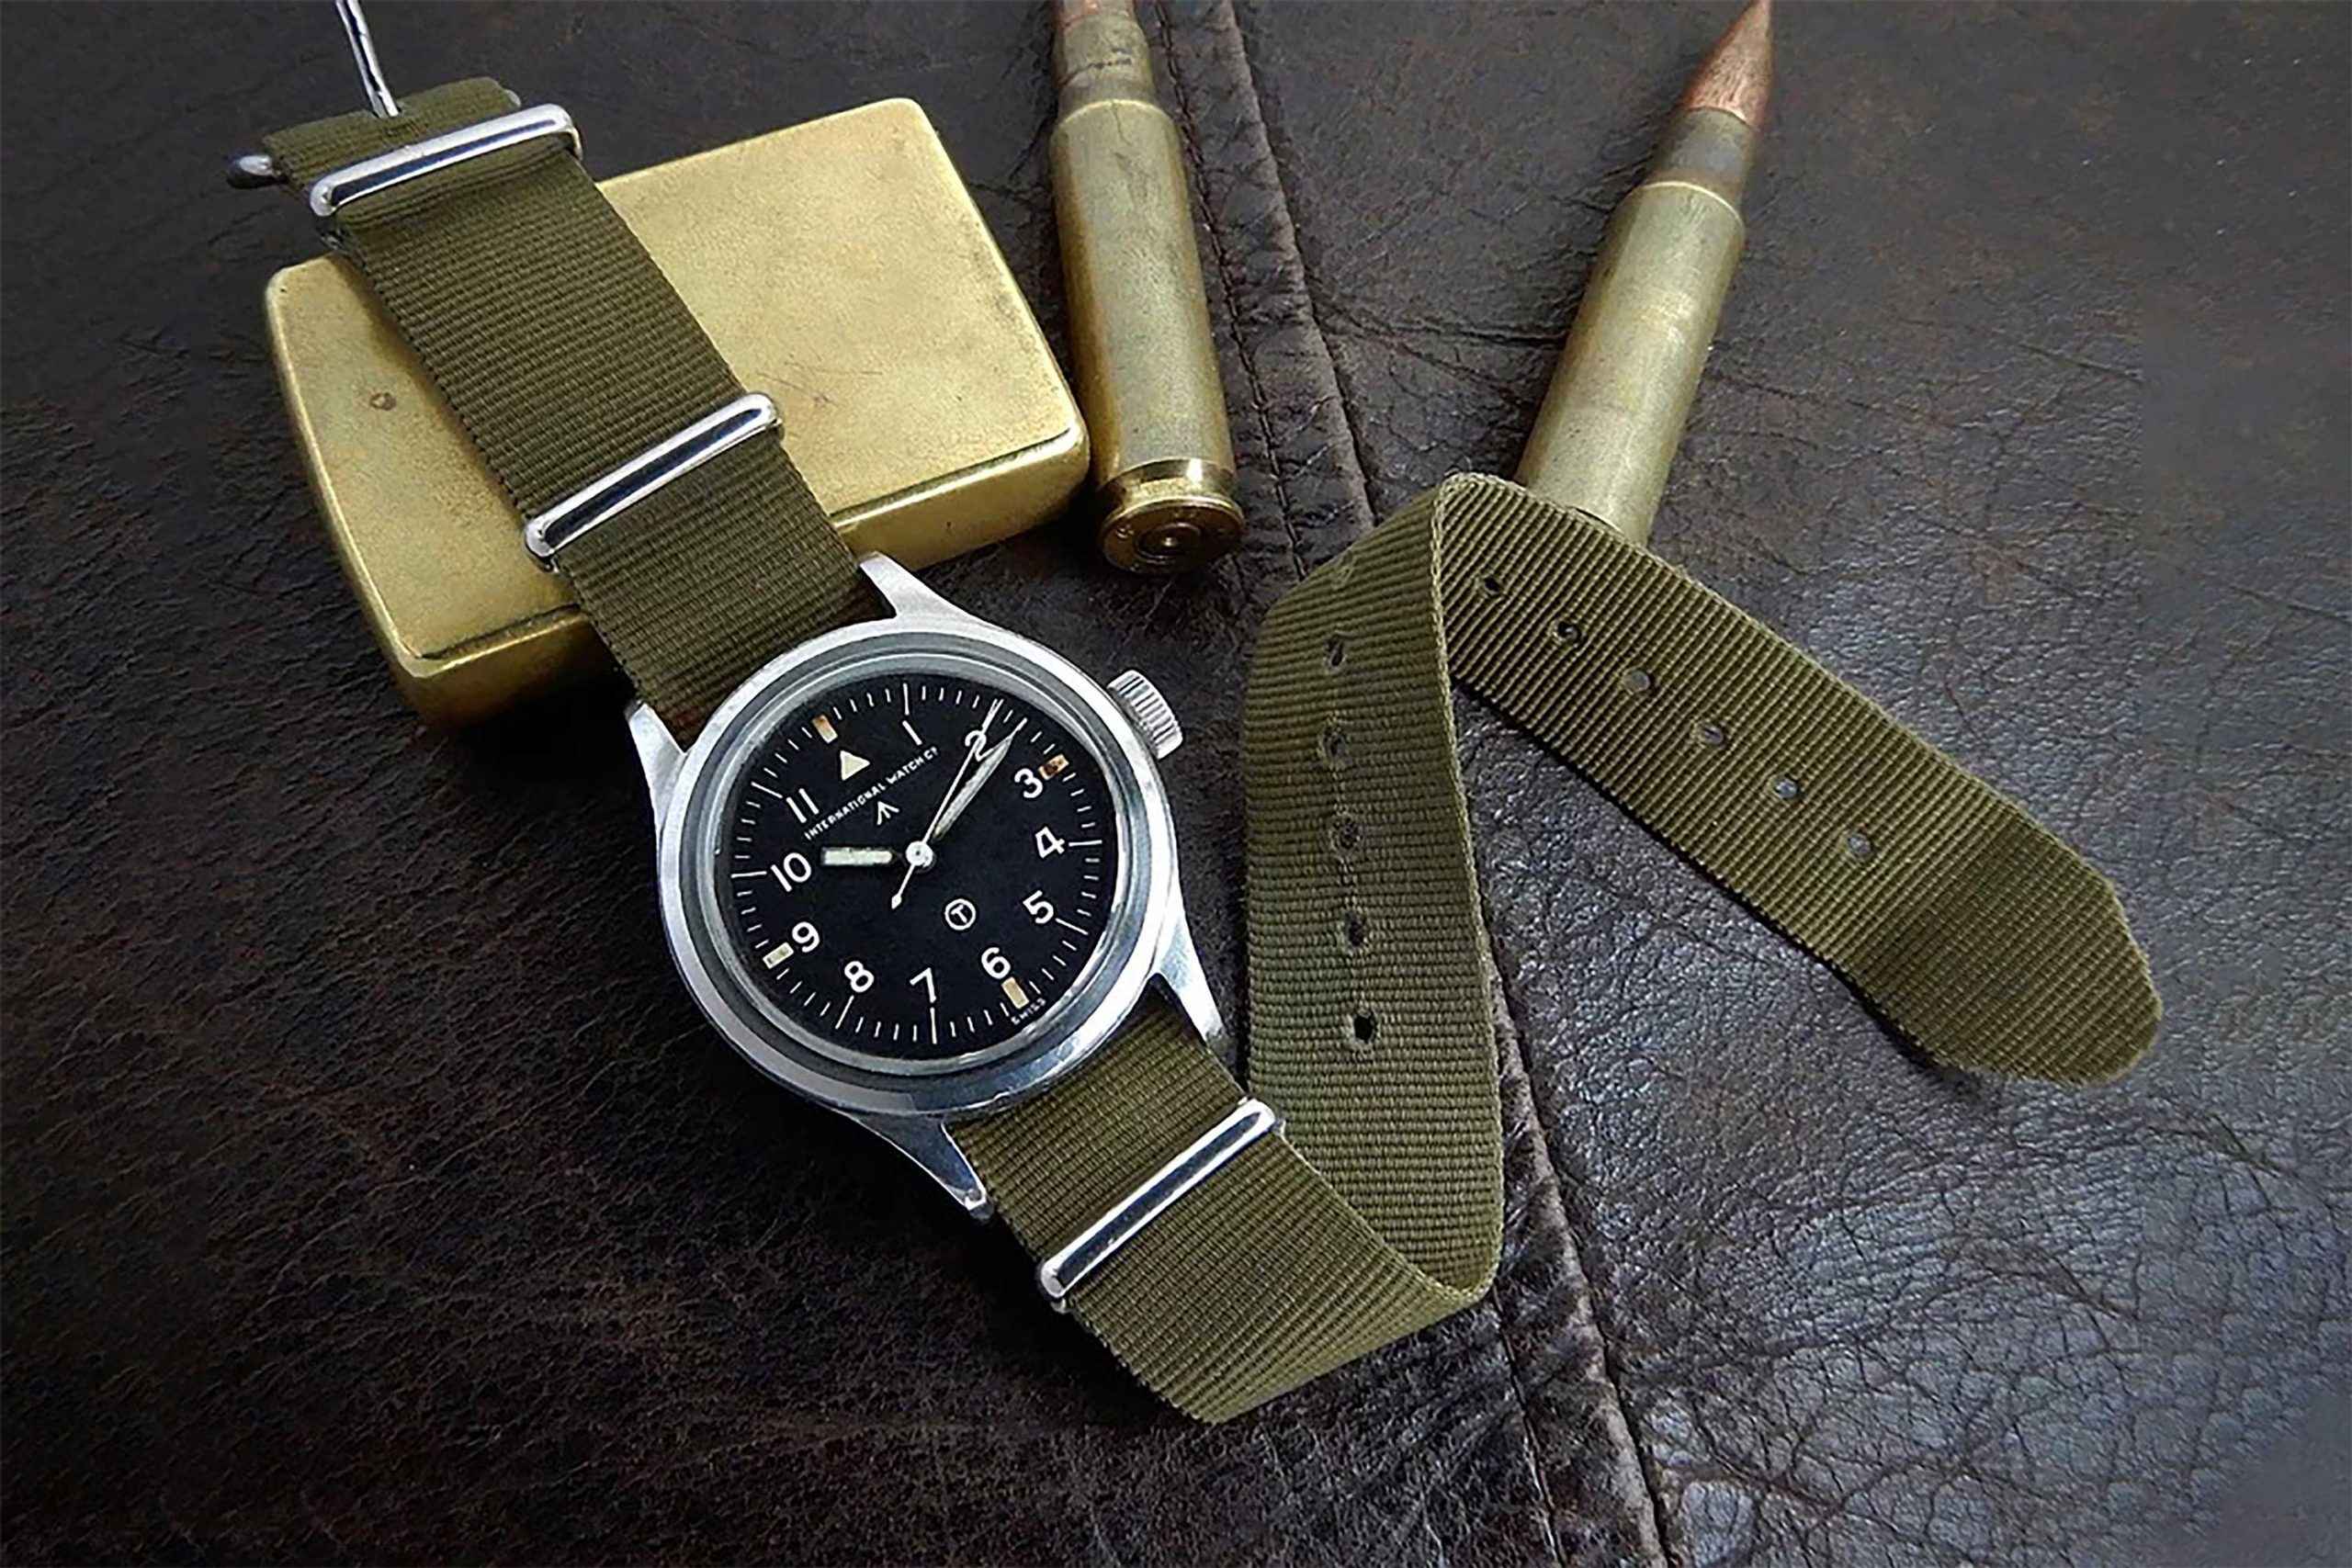 The IWC Mark XI powered by Calibre 89 was made for the Royal Air Force in 1951 (Image: fullywound.com)